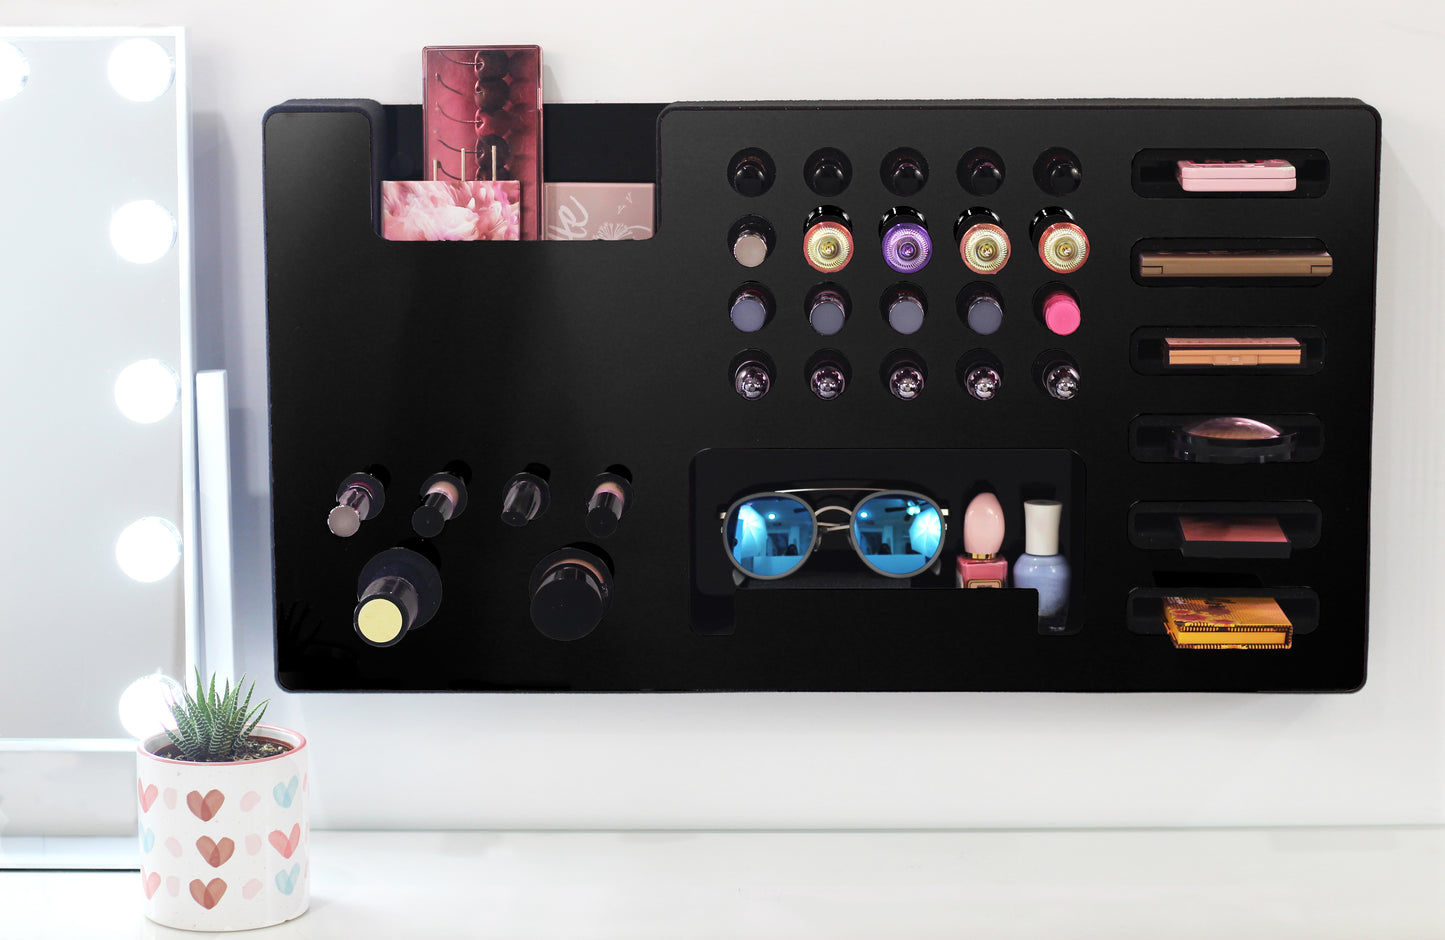 Black Ultra Complete Makeup Solution Organizer shown mounted on the wall holding lipsticks, lip glosses, nail polishes, brushes, sunglasses and more by keeping items accessible and off of the counter. Shown next to a makeup vanity with samples of suggested items the organizer can hold.